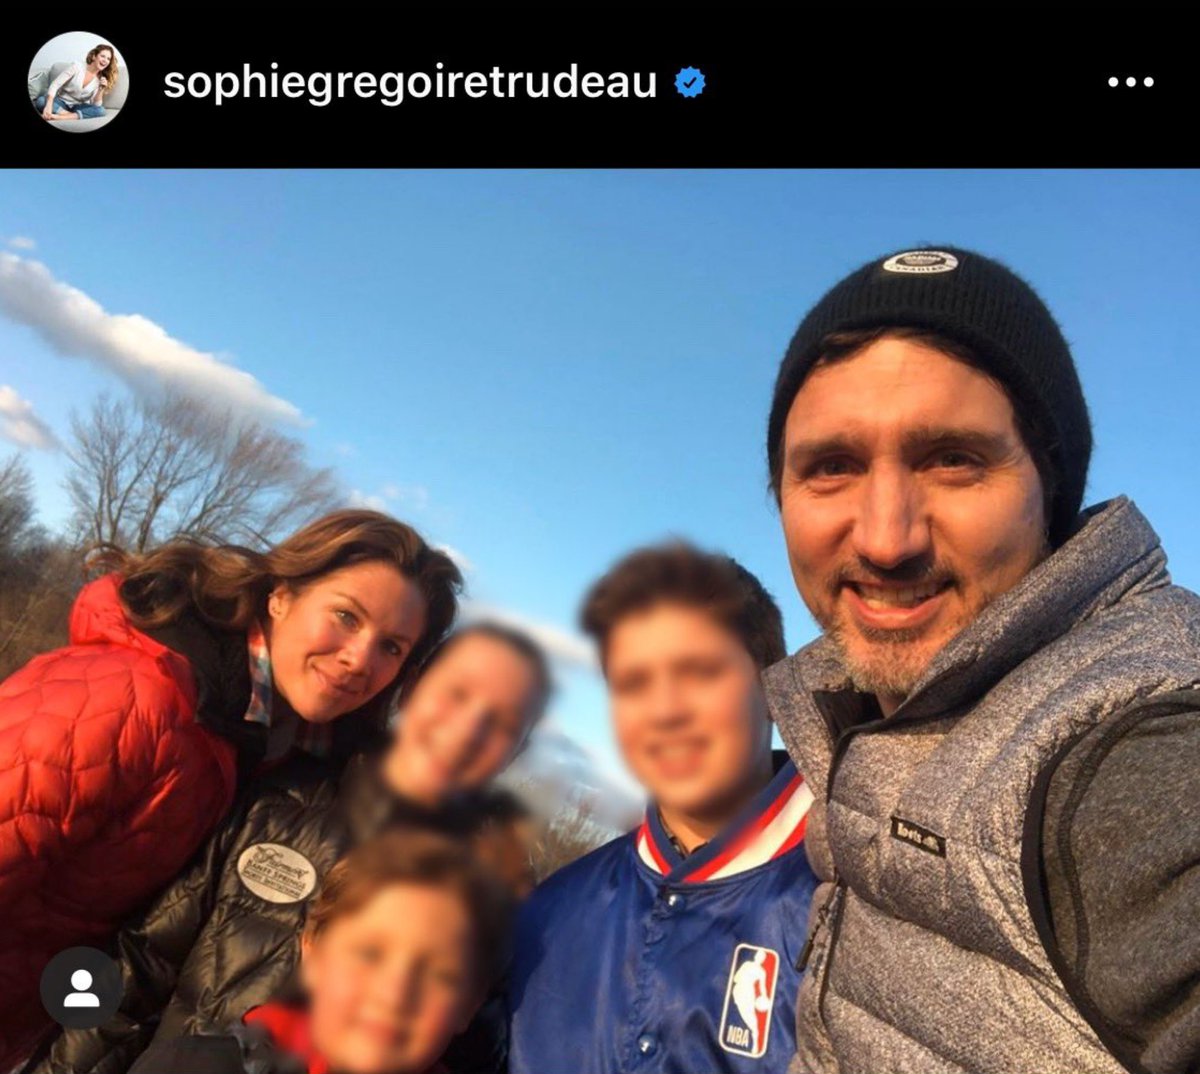 I was hoping it wasn't true, but  #Canada's Prime Minister Justin Trudeau seems to have spent Easter at the family's "cottage" in Harrington Lake, which is in another province,  #Québec. We've all been solemnly told to stay home, not travel to other regions...